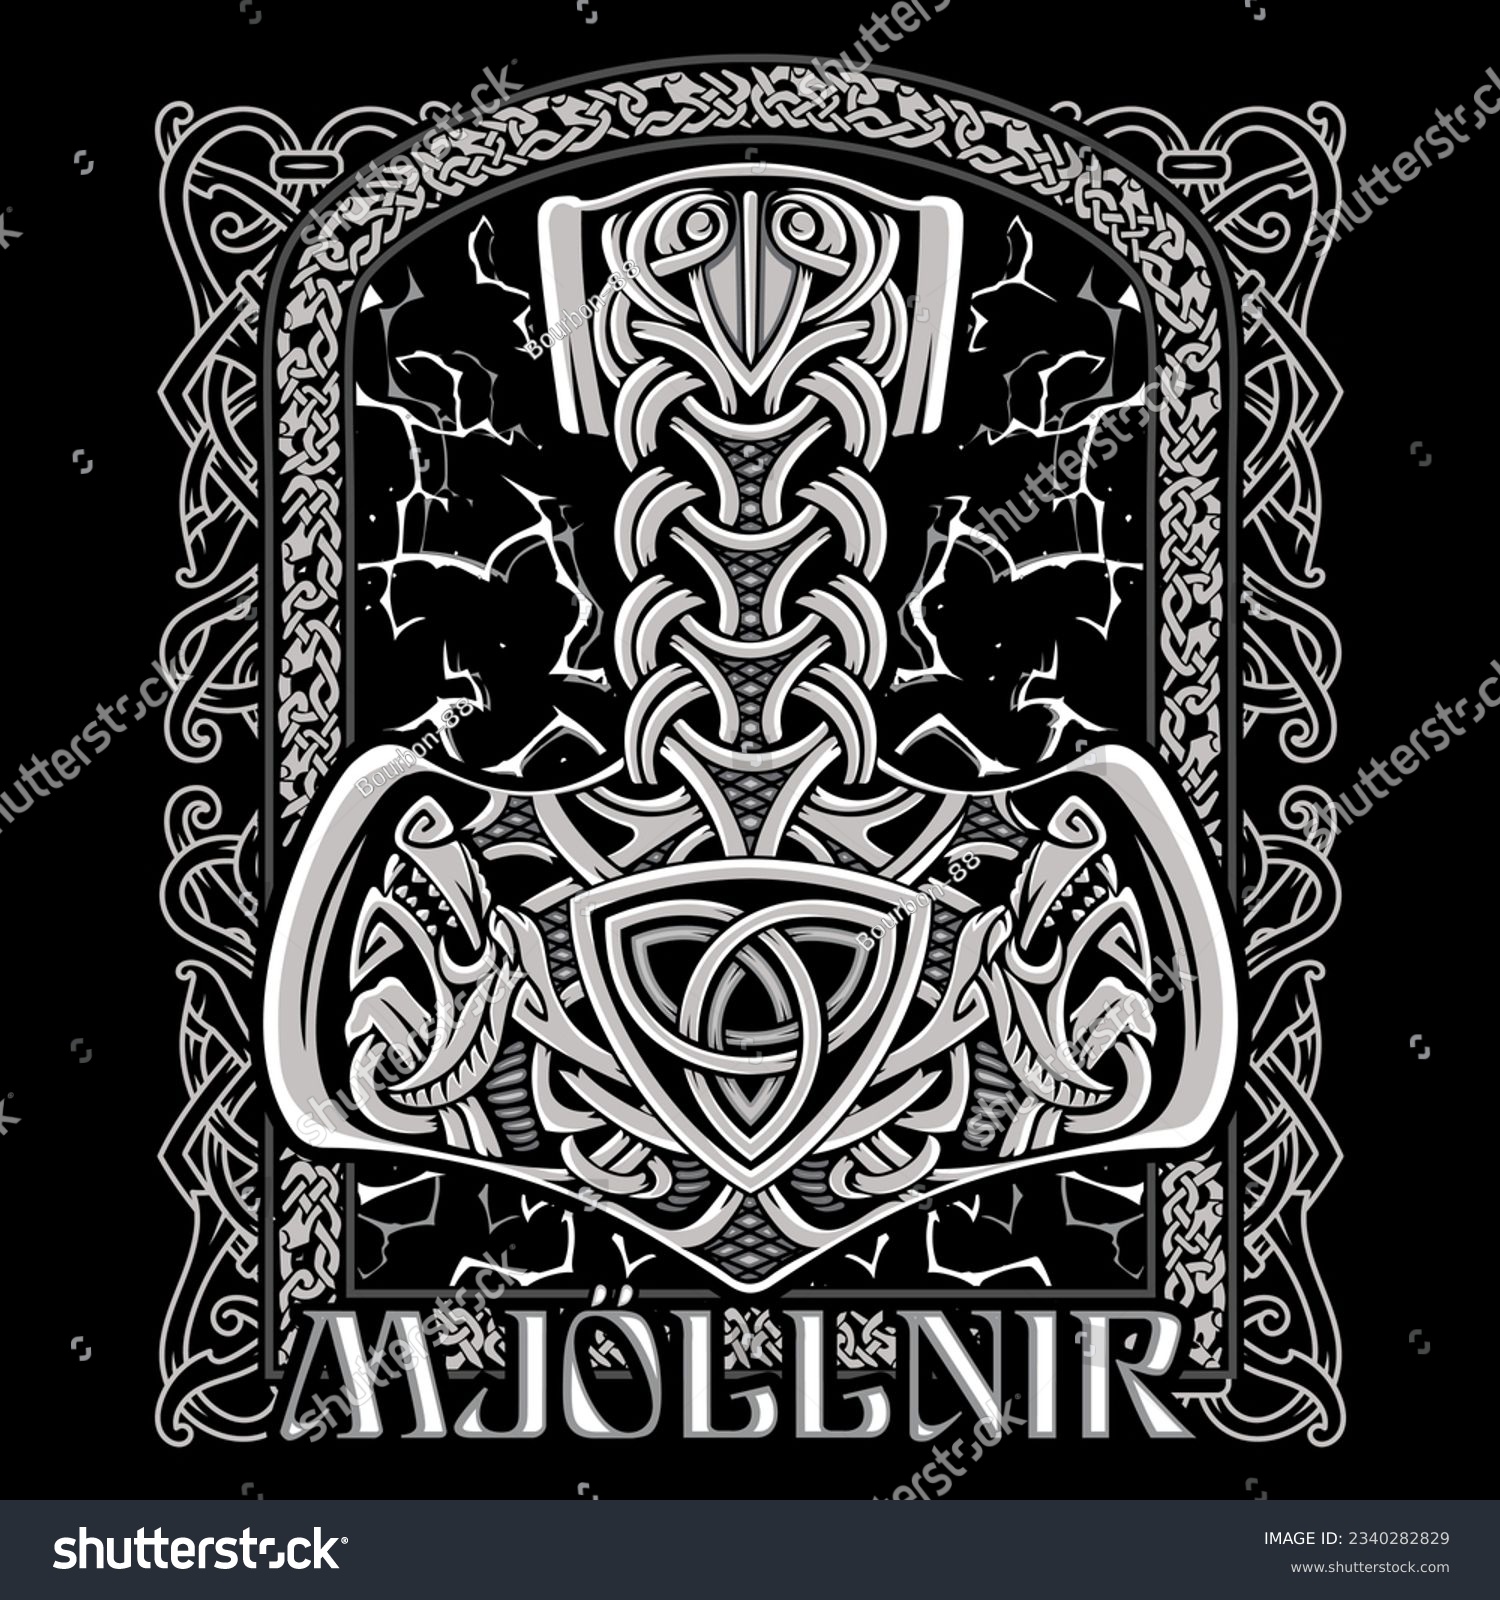 SVG of Ancient Scandinavian design. Thor's Hammer, Mjolnir, with wolf heads, lightning and a Celtic-Scandinavian pattern, isolated on black, vector illustration svg